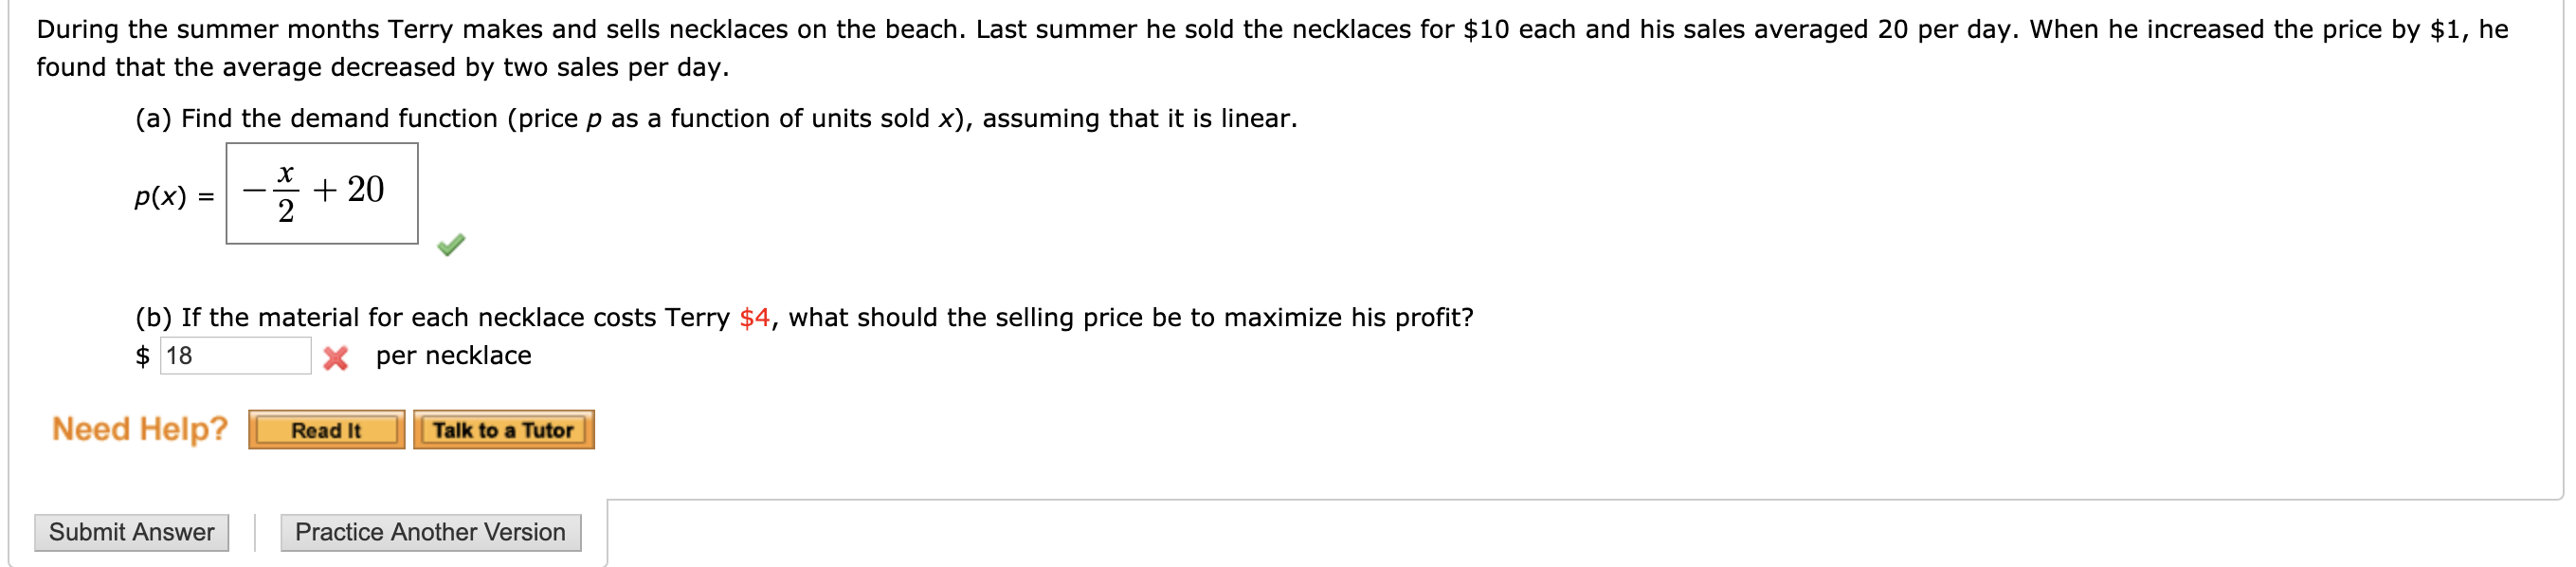 During the summer months Terry makes and sells necklaces on the beach. Last summer he sold the necklaces for $10 each and his sales averaged 20 per day. When he increased the price by $1, he
found that the average decreased by two sales per day.
(a) Find the demand function (price p as a function of units sold x), assuming that it is linear.
х
20
2
Р(x) 3
(b) If the material for each necklace costs Terry $4, what should the selling price be to maximize his profit?
18
Xper necklace
Need Help?
Read It
Talk to a Tutor
Submit Answer
Practice Another Version
